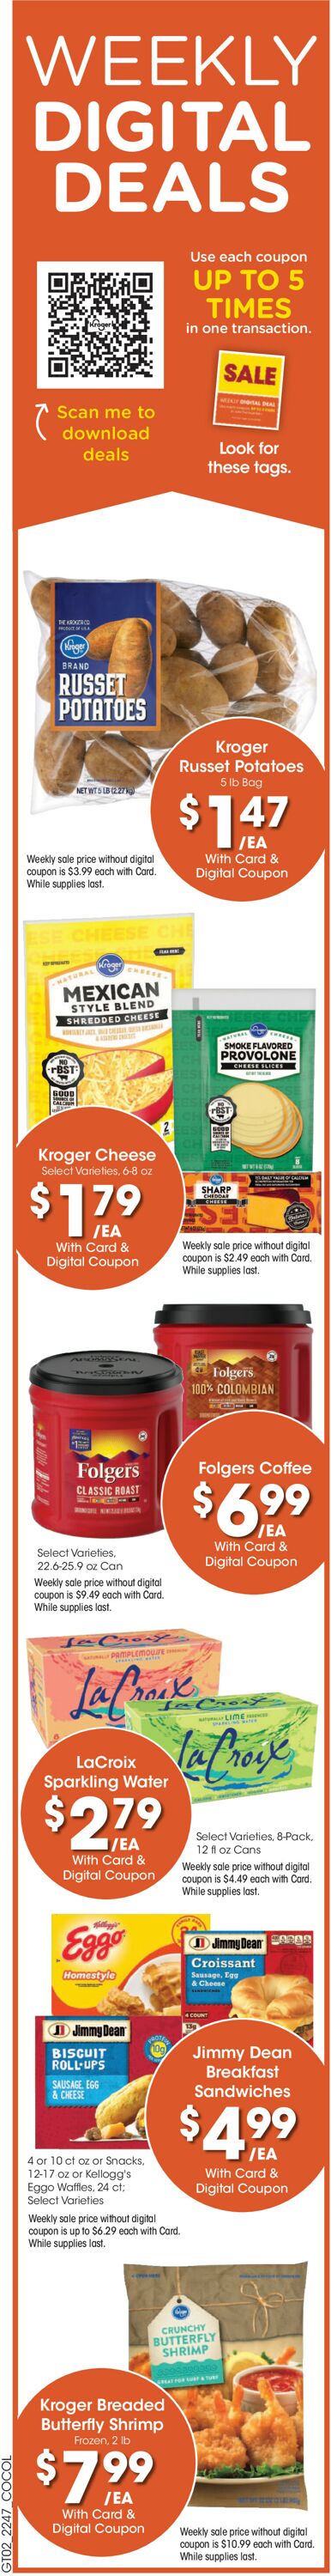 Catalogue Kroger from 12/21/2022